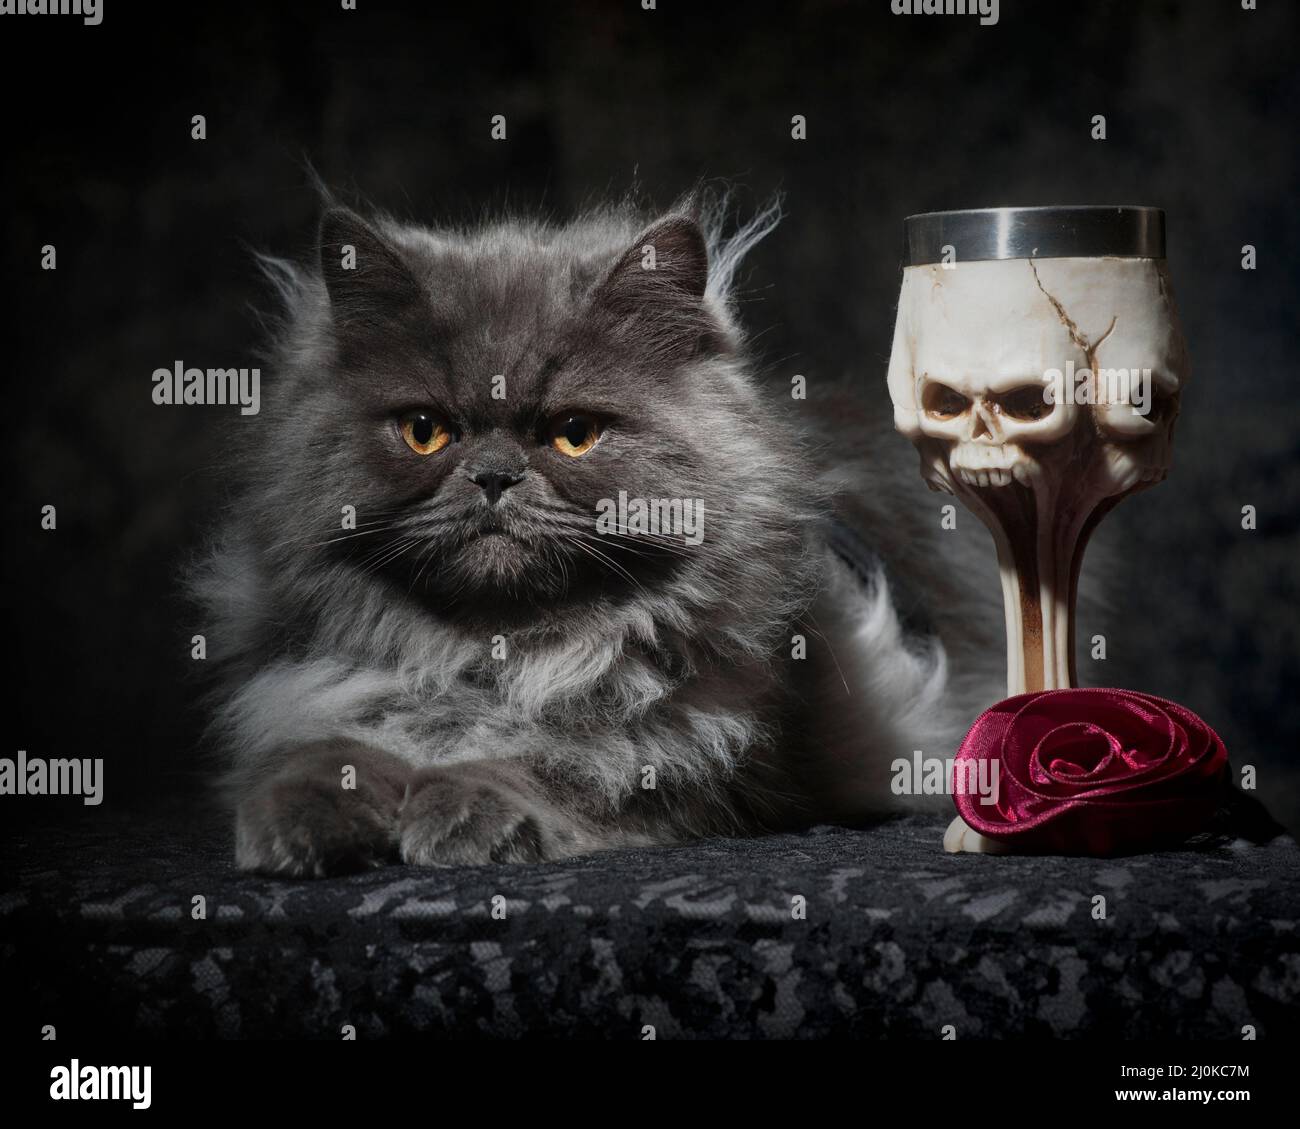 Adorably grumpy looking long haired grey cat posing with gothy props. Stock Photo